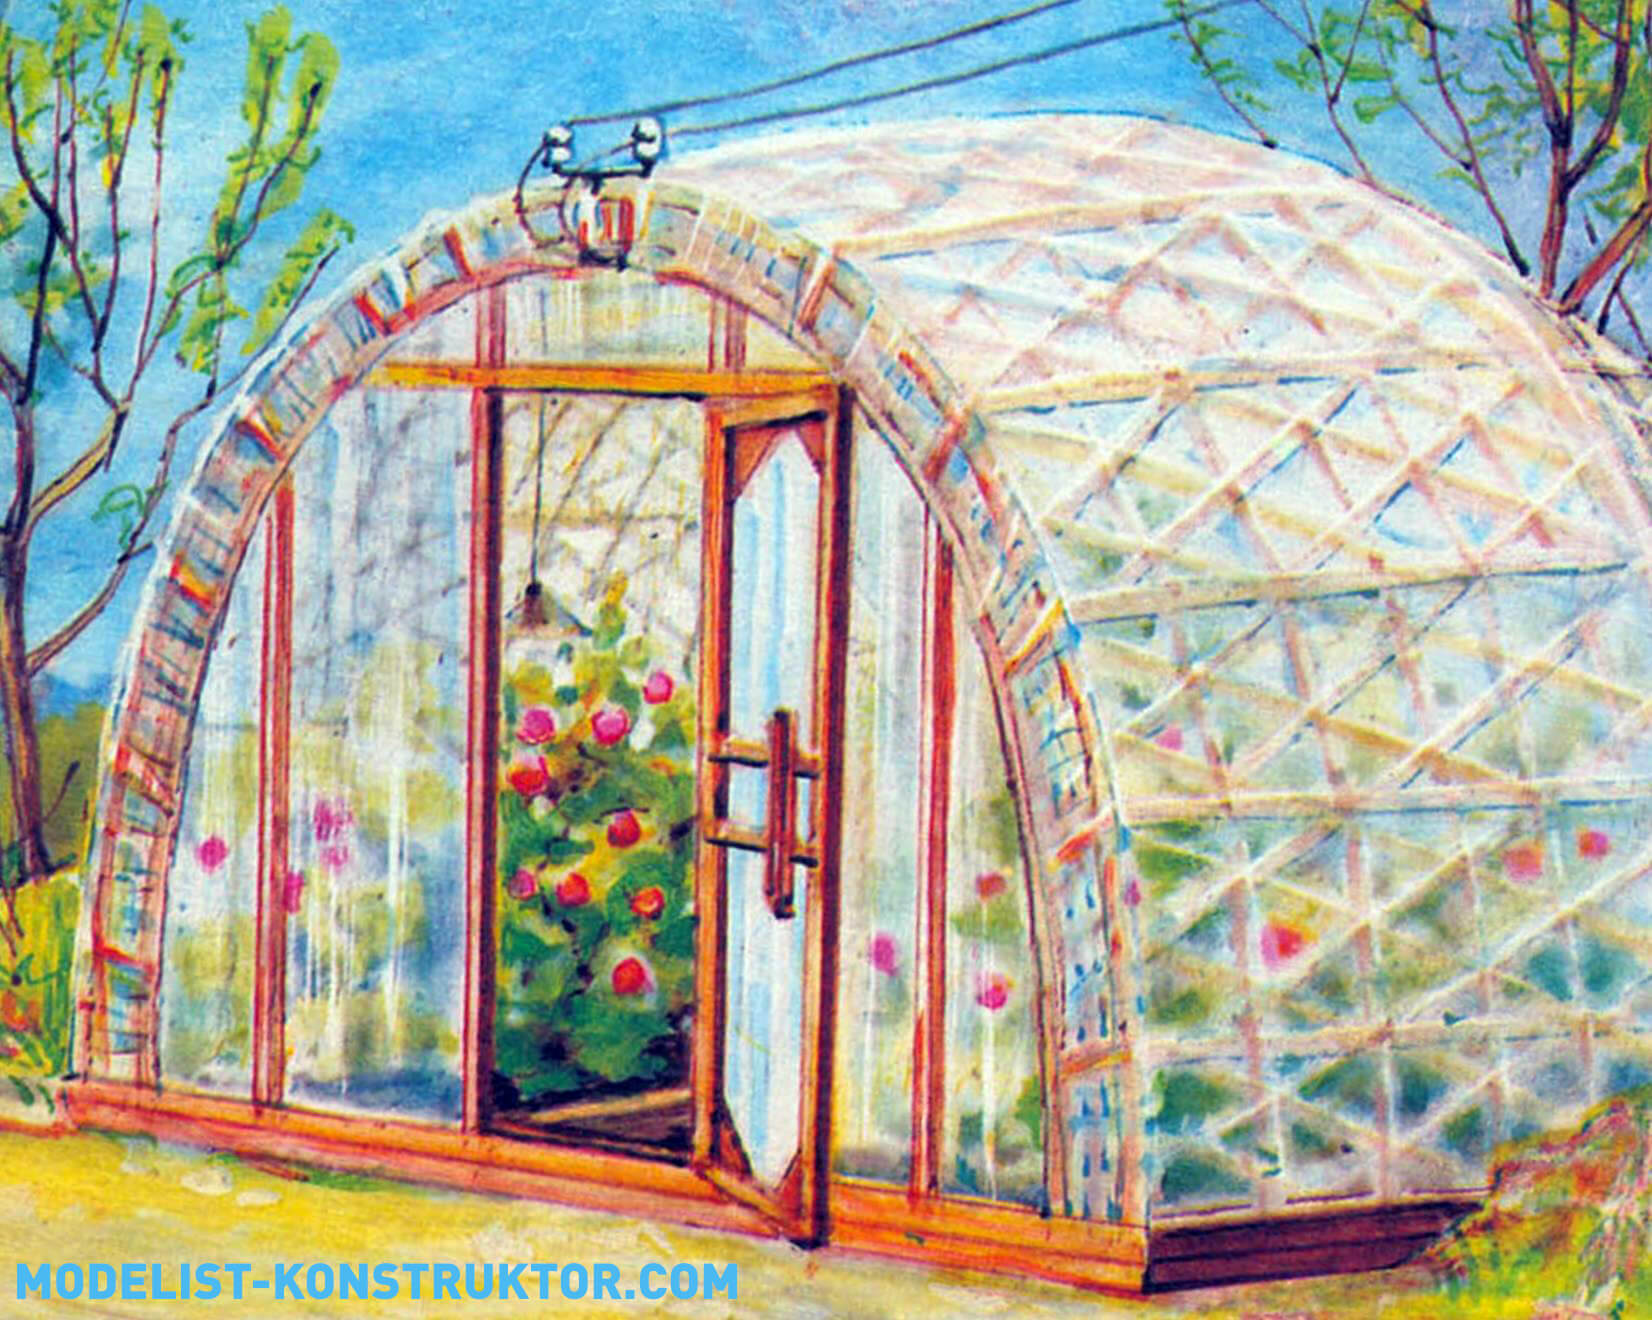 ARCH TO ARCH - GREENHOUSE READY